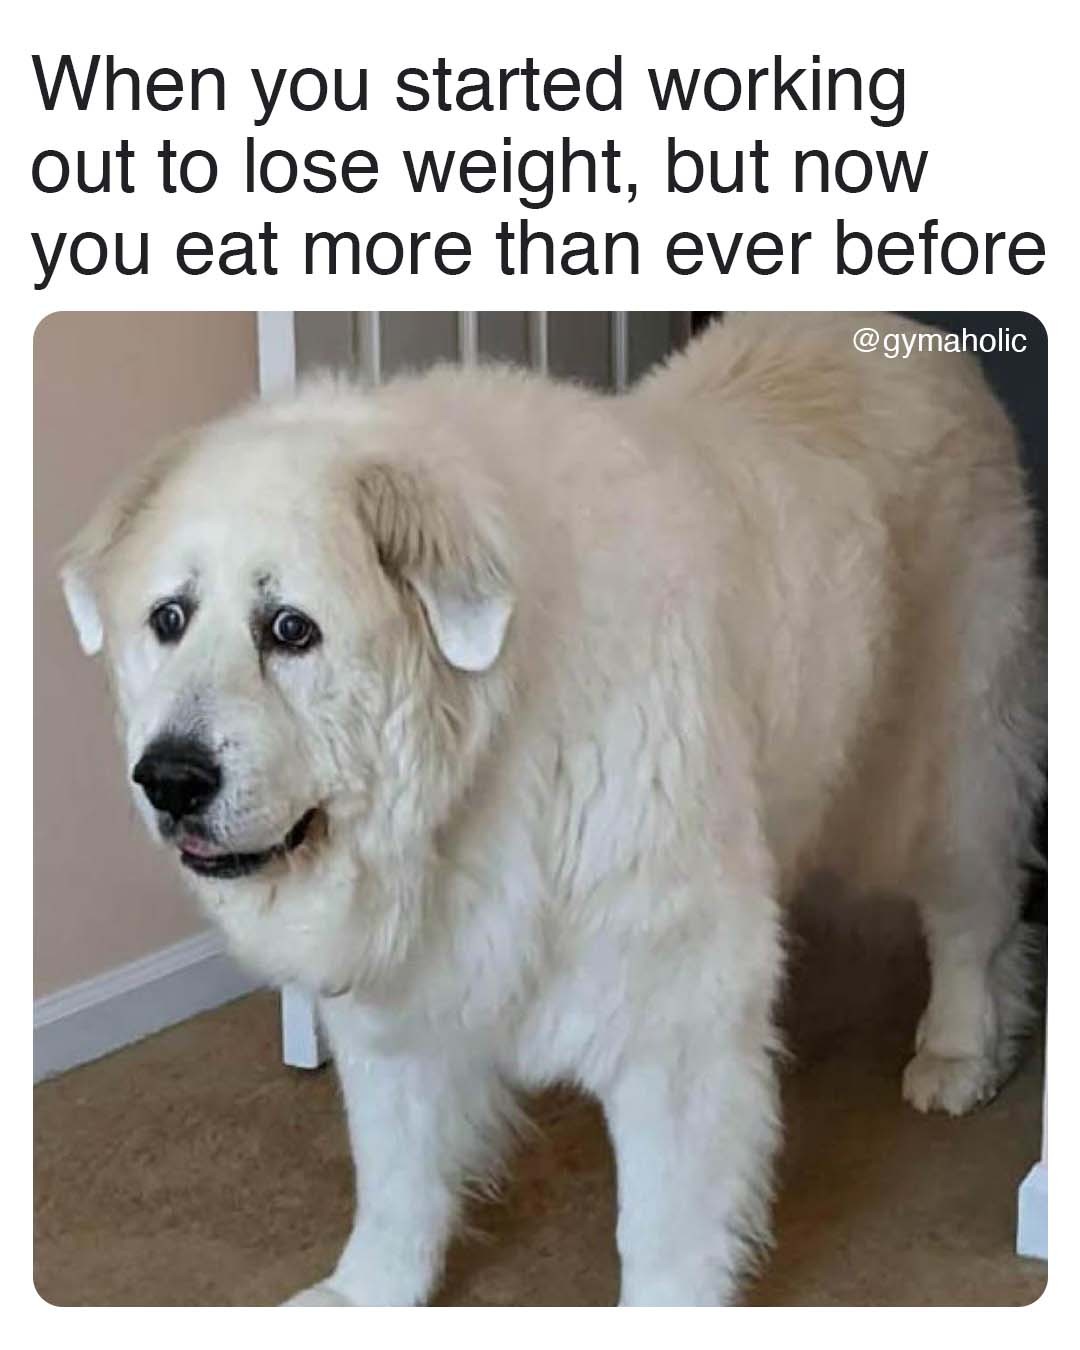 When you started working out to lose weight